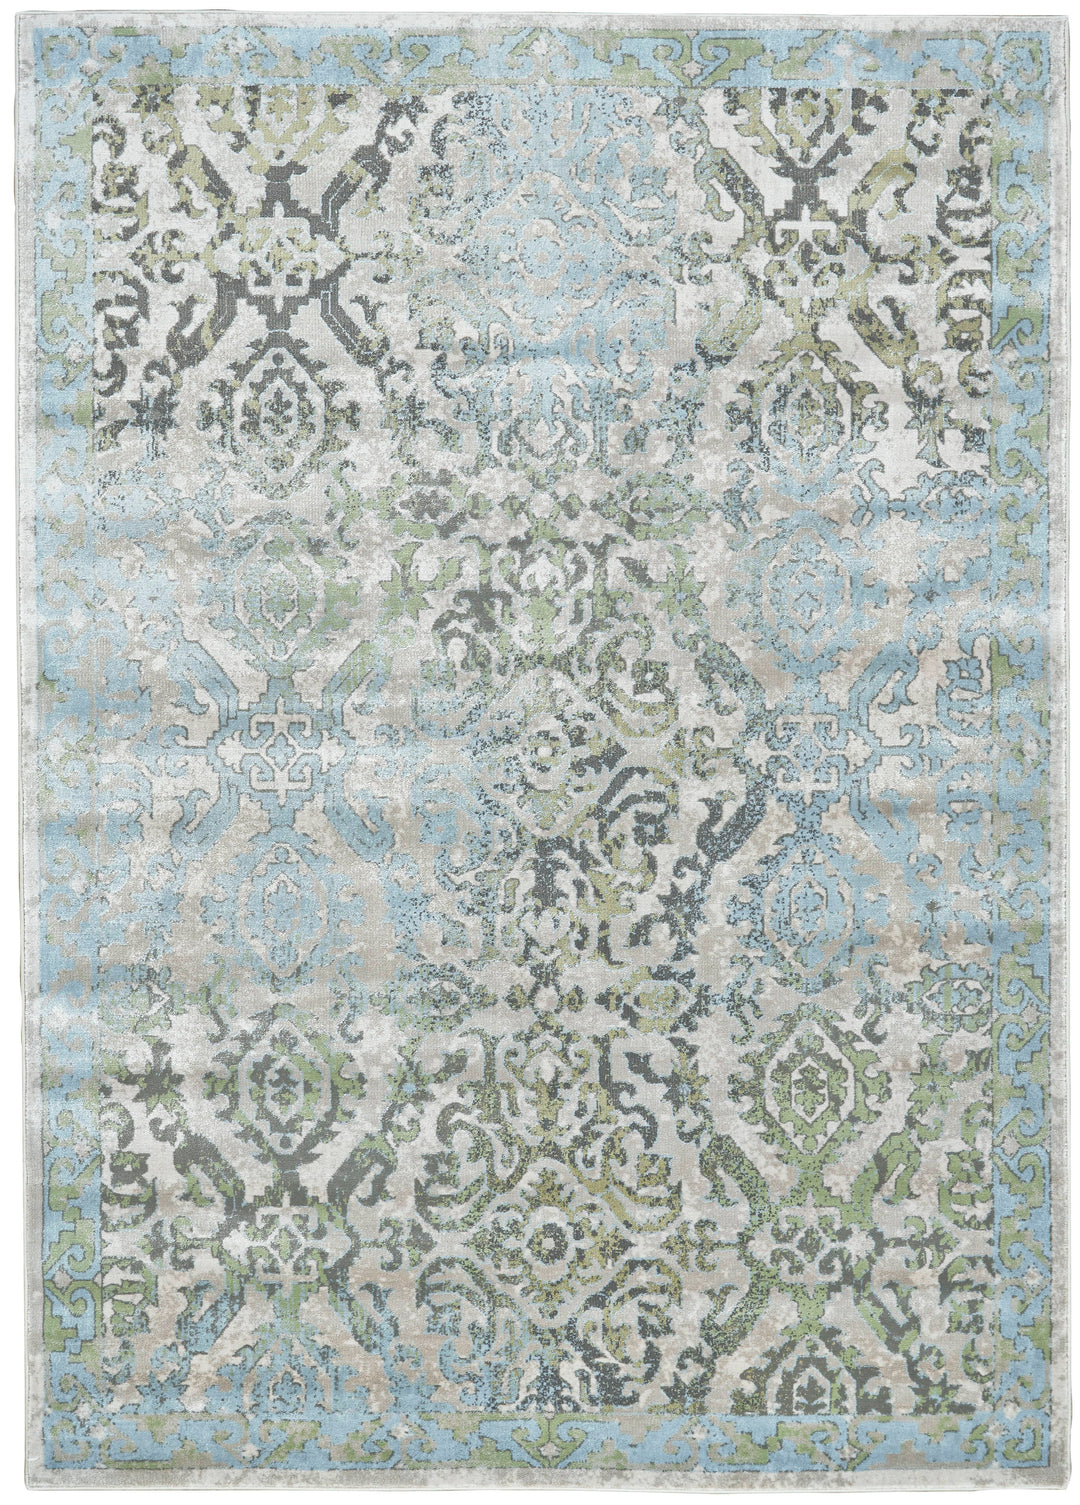 Feizy Feizy Katari Damask Print Rug - Available in 8 Sizes - Turquoise Blue & Mint 4'-3" x 6'-3" 6613374FICEBIRC16